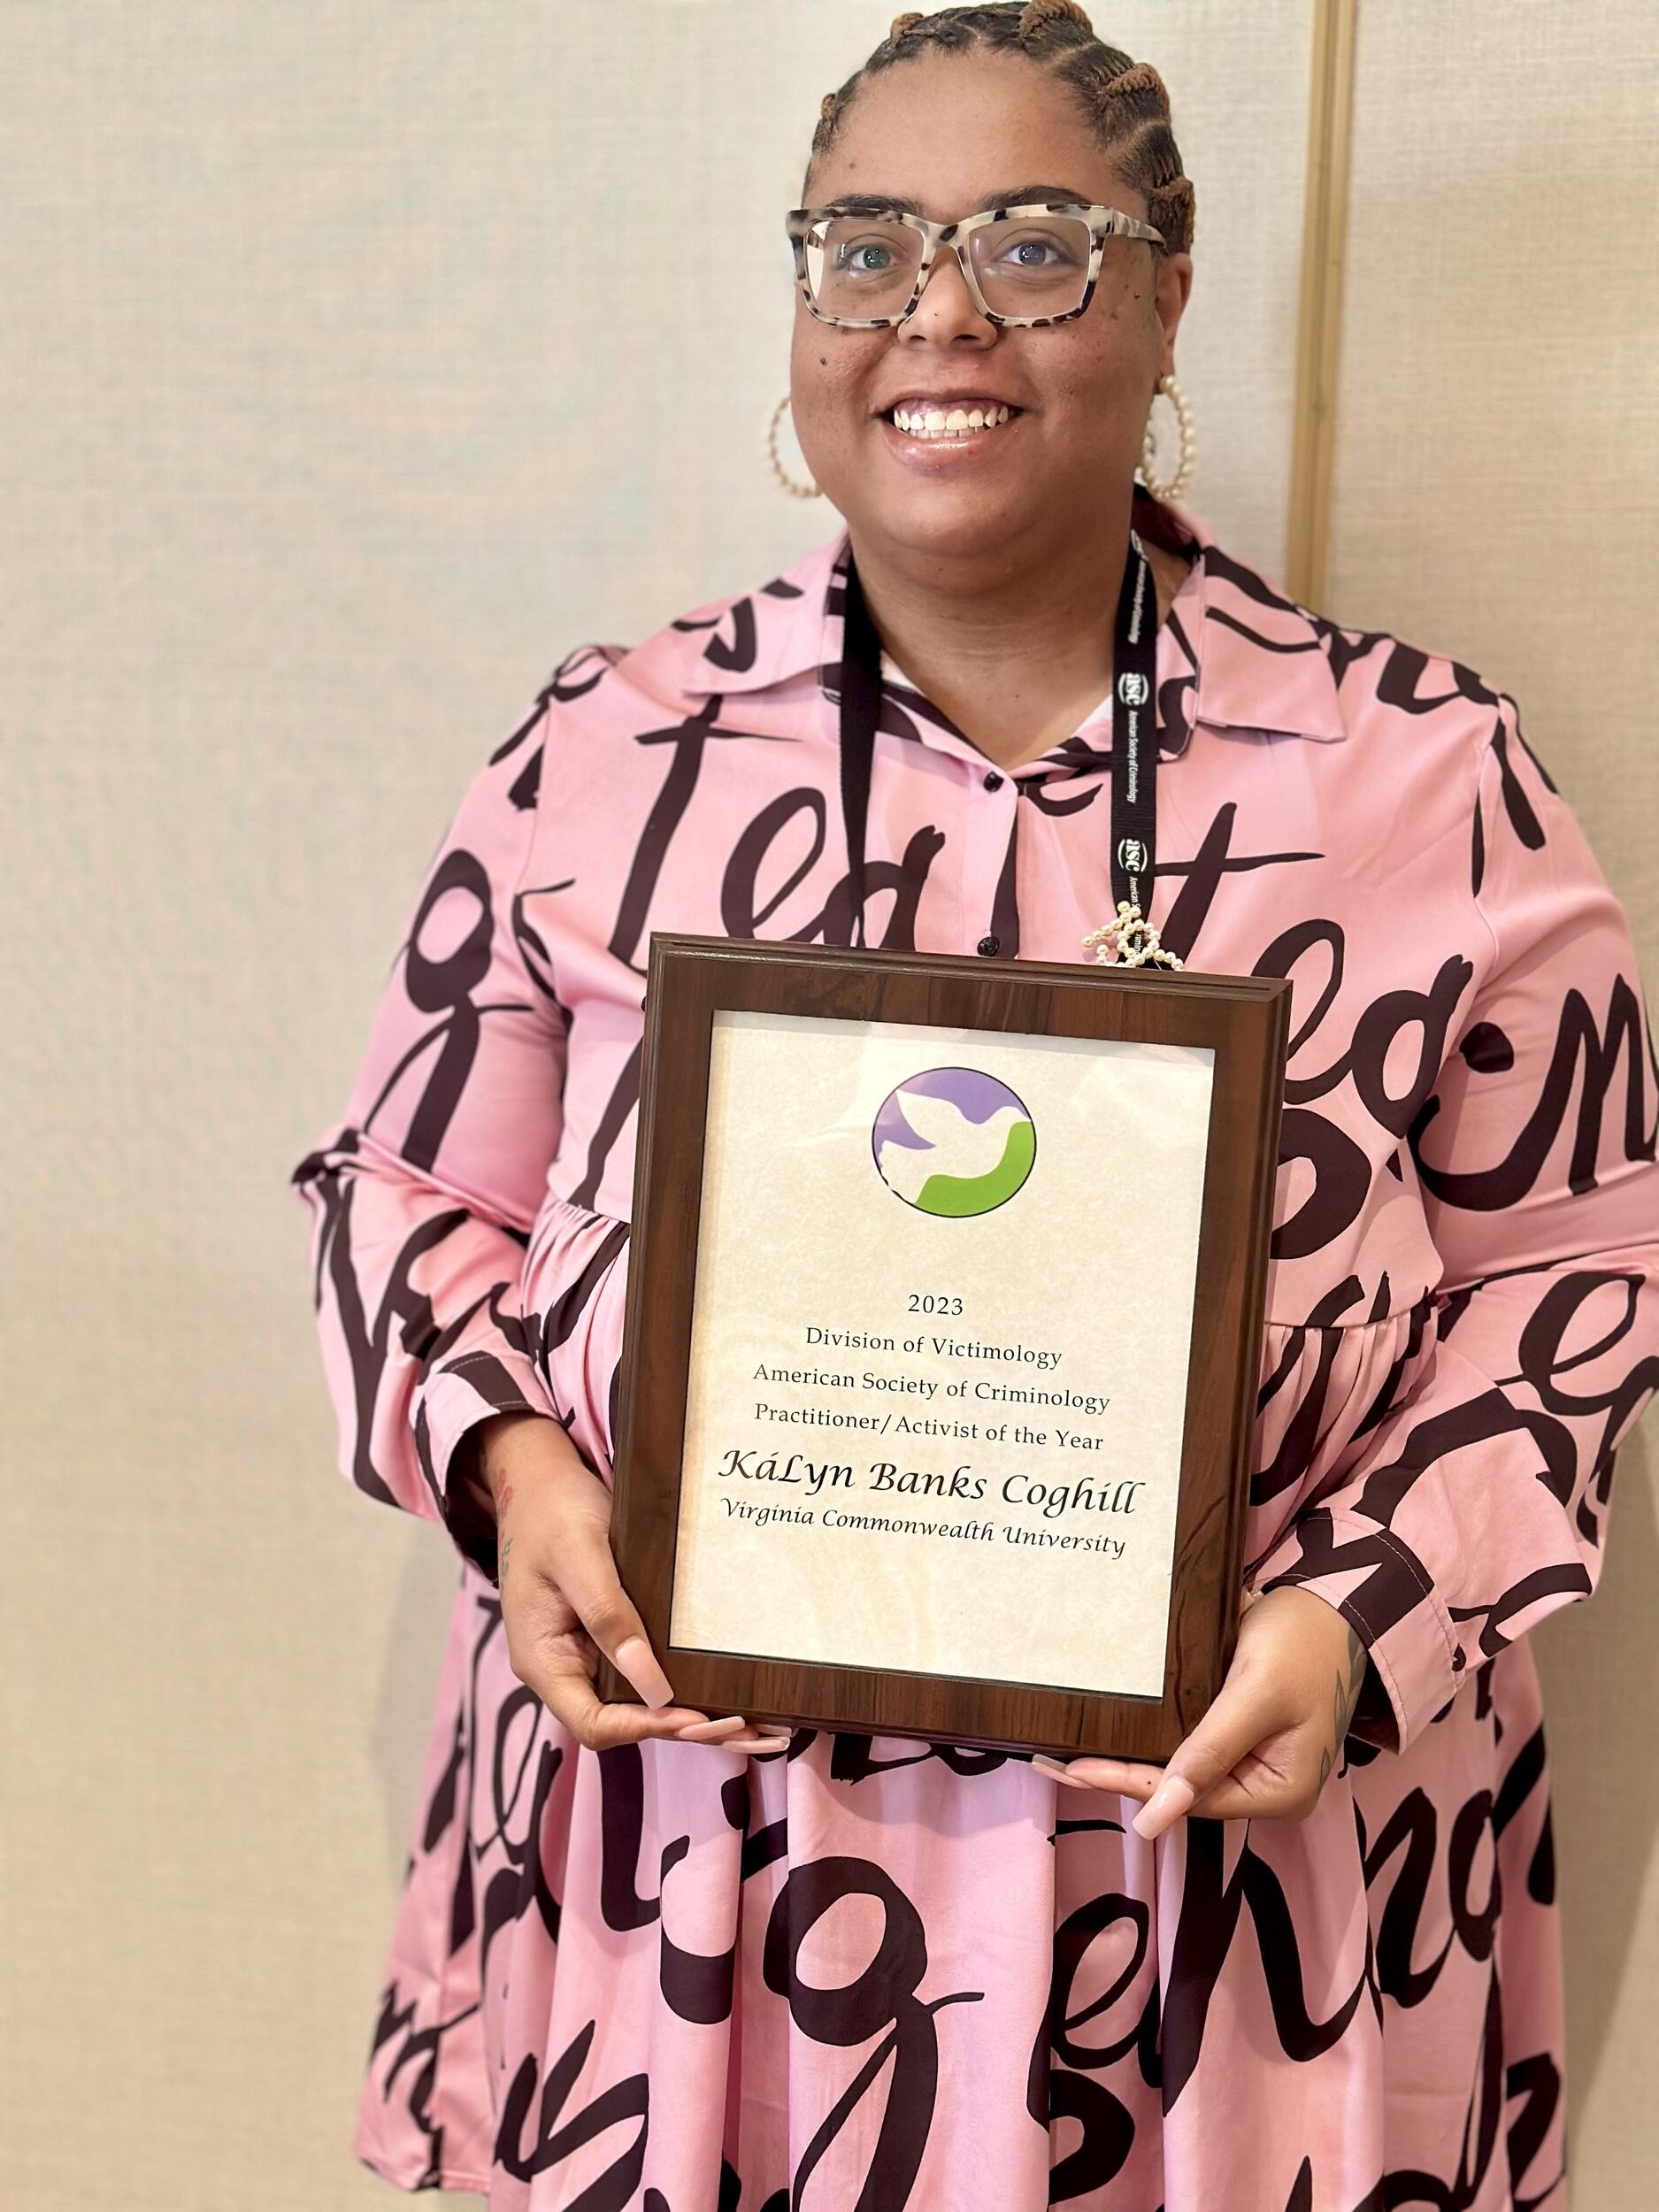 A photo of a woman holding an award certificate 